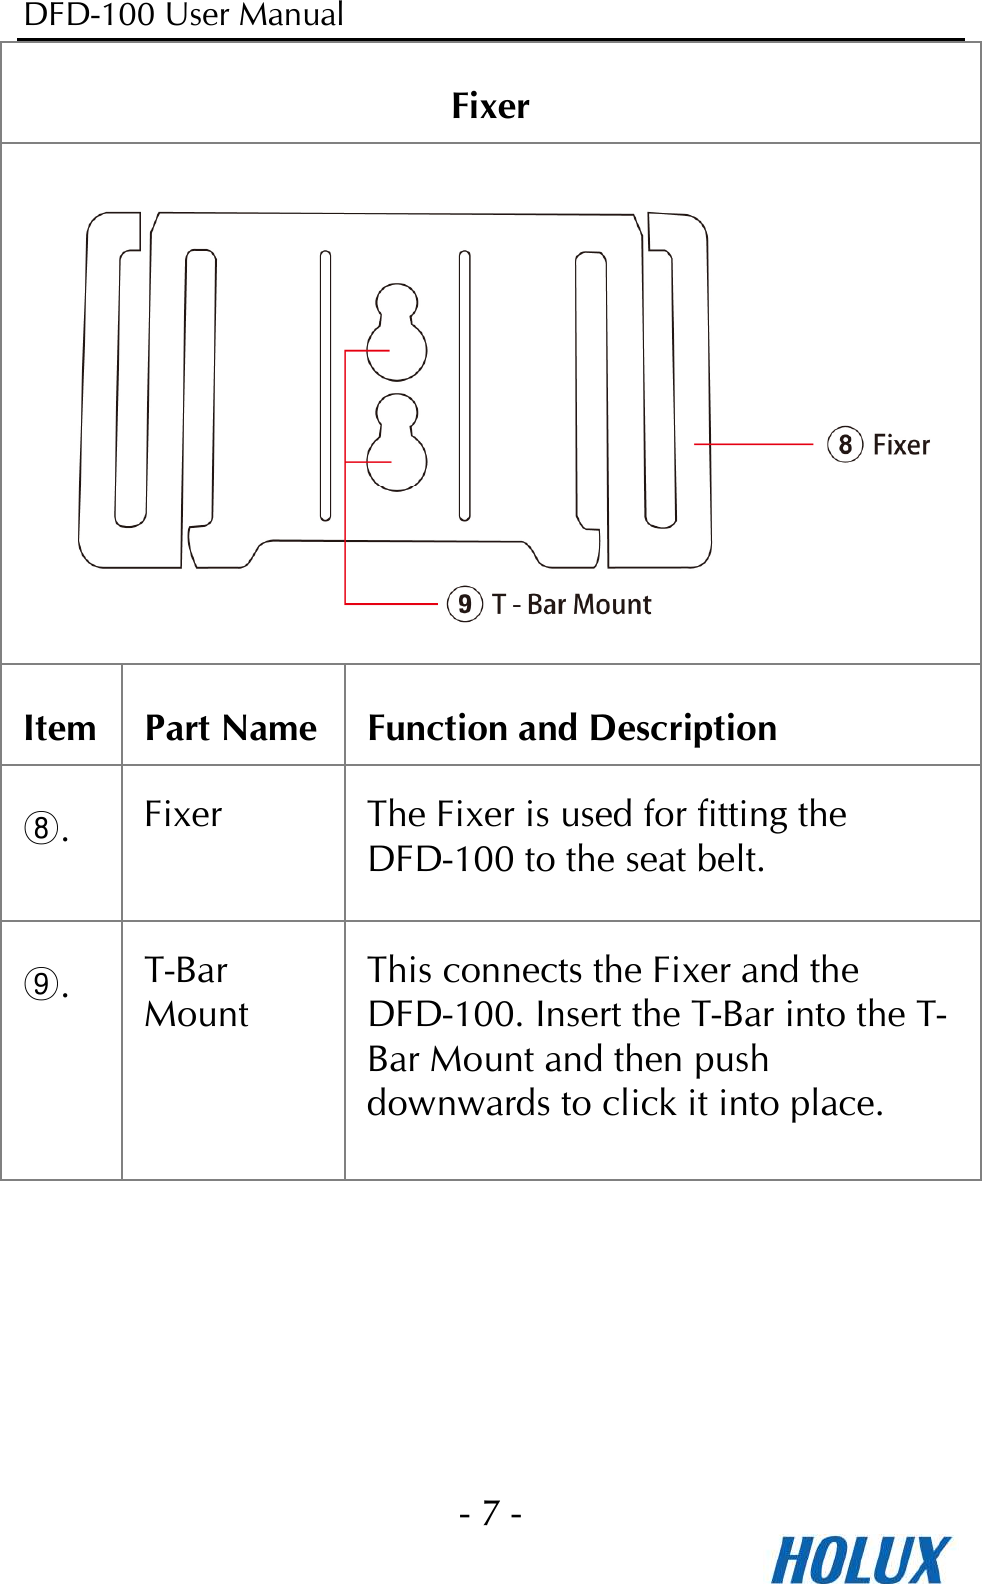 DFD-100 User Manual - 7 -  Fixer  Item Part Name Function and Description ⑧. Fixer  The Fixer is used for fitting the DFD-100 to the seat belt. ⑨. T-Bar Mount This connects the Fixer and the DFD-100. Insert the T-Bar into the T- Bar Mount and then push downwards to click it into place.      